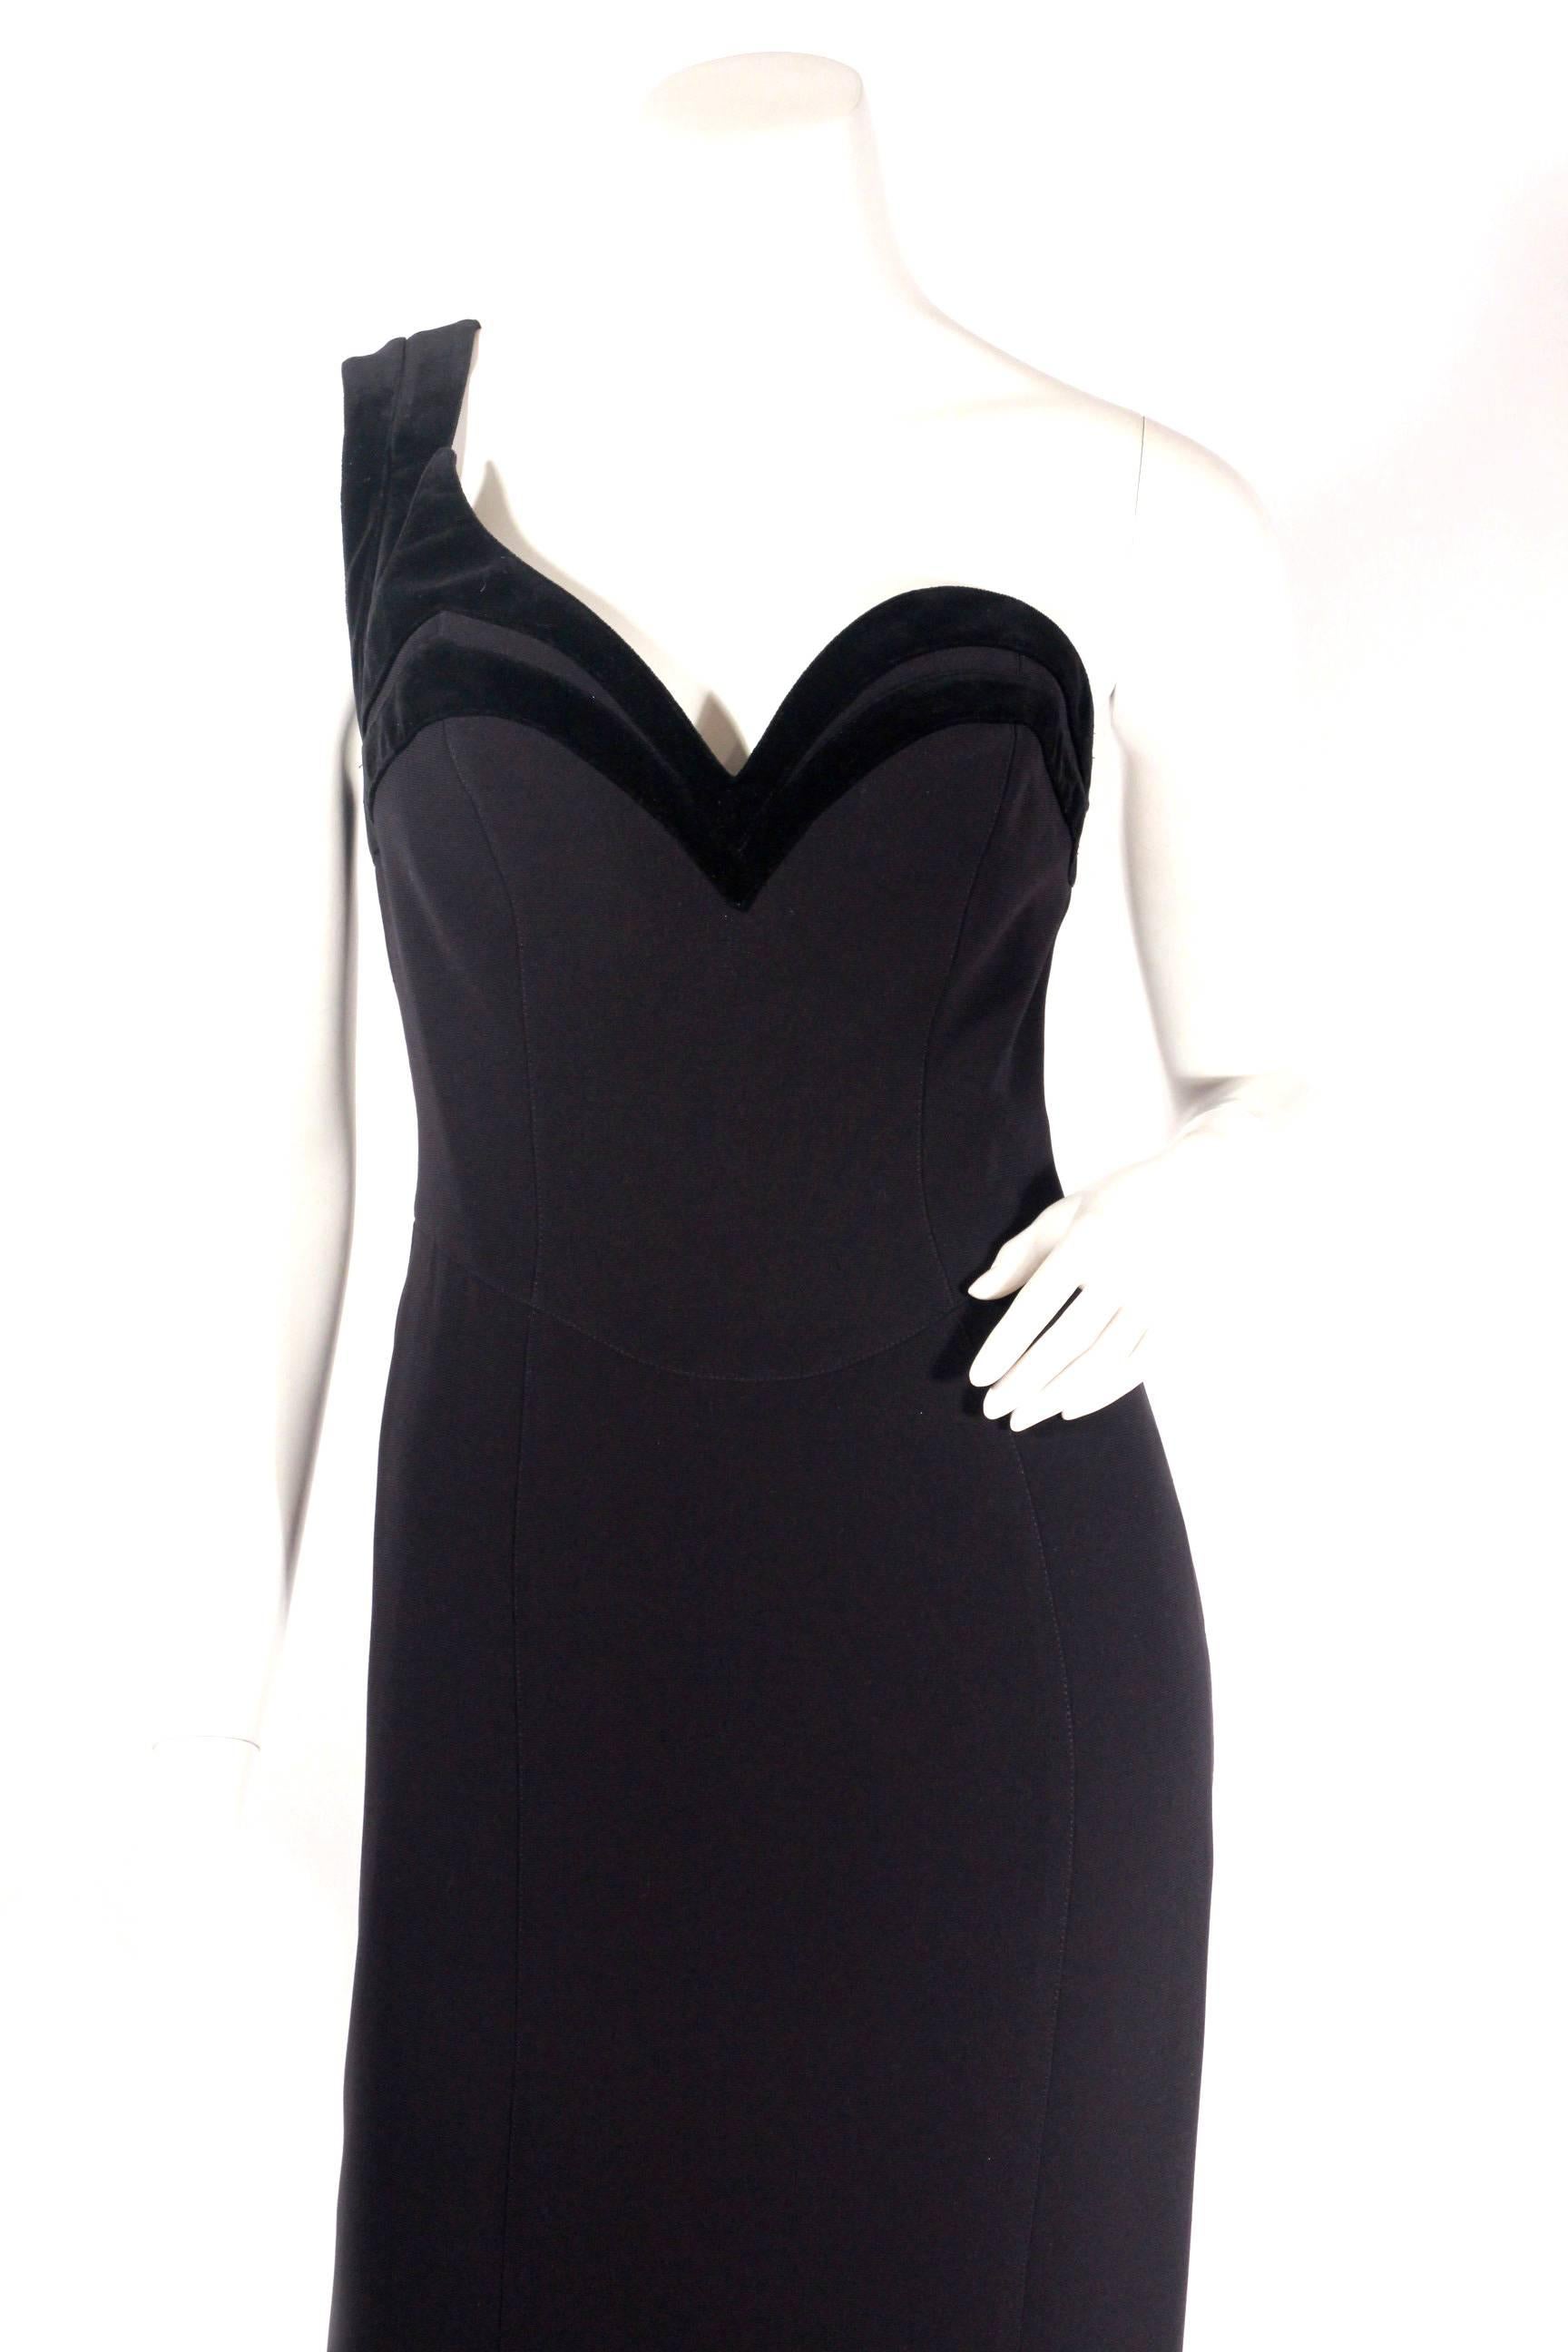 Vintage Thierry Mugle, circa 80s/ early 90s, full length gown with velvet detailing. This stunning dress is a classic, featuring one shoulder, velvet lining at bust, zip back. Excellent condition. 